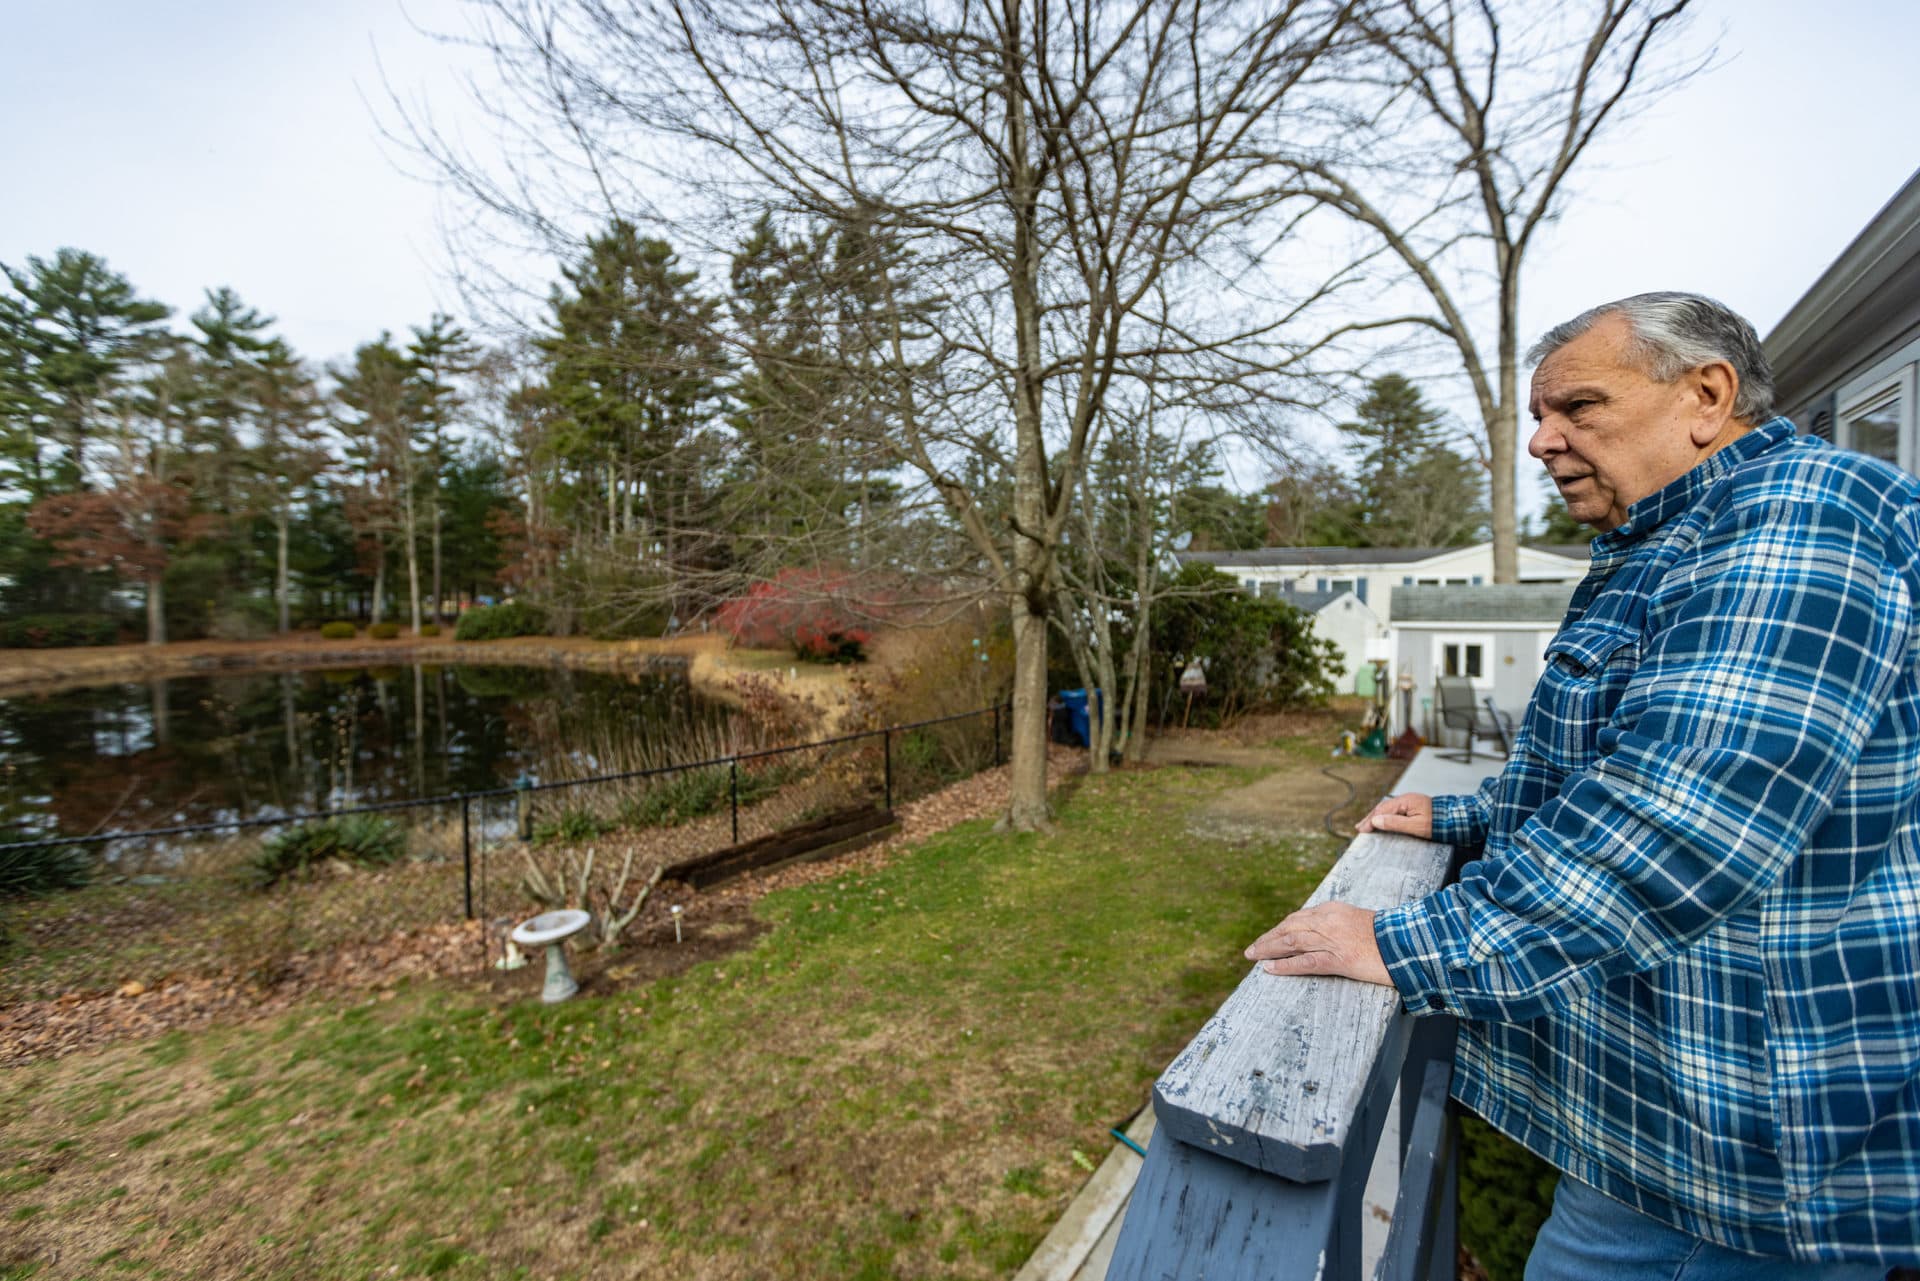 Bob Costa looks at the pond behind his home at Royal Crest. (Jesse Costa/WBUR)